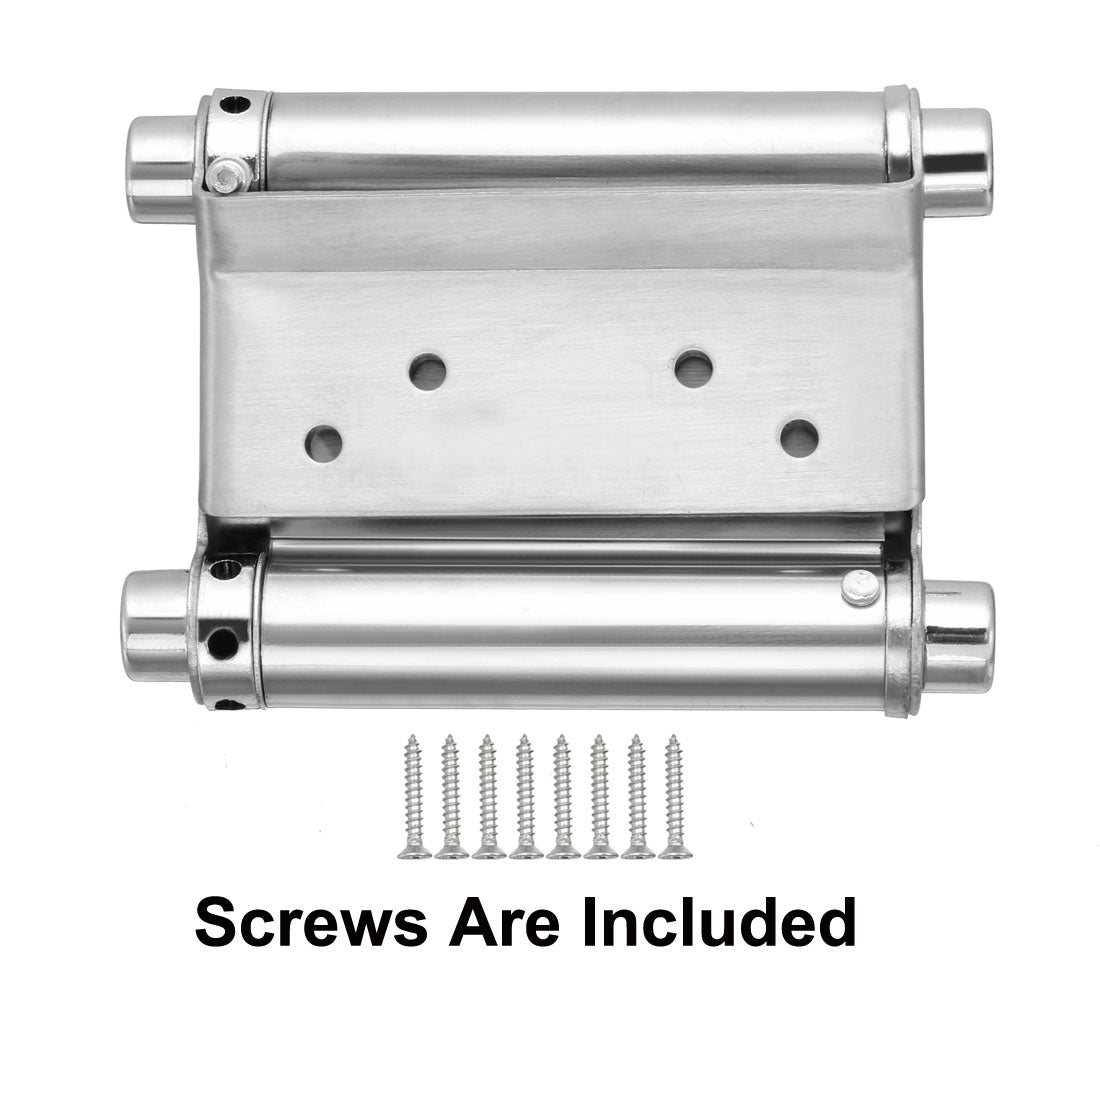 uxcell Uxcell Double Action Spring Hinge 3" Stainless Steel Brushed Heavy Load Hinges with Tension Adjustment 1 Pack